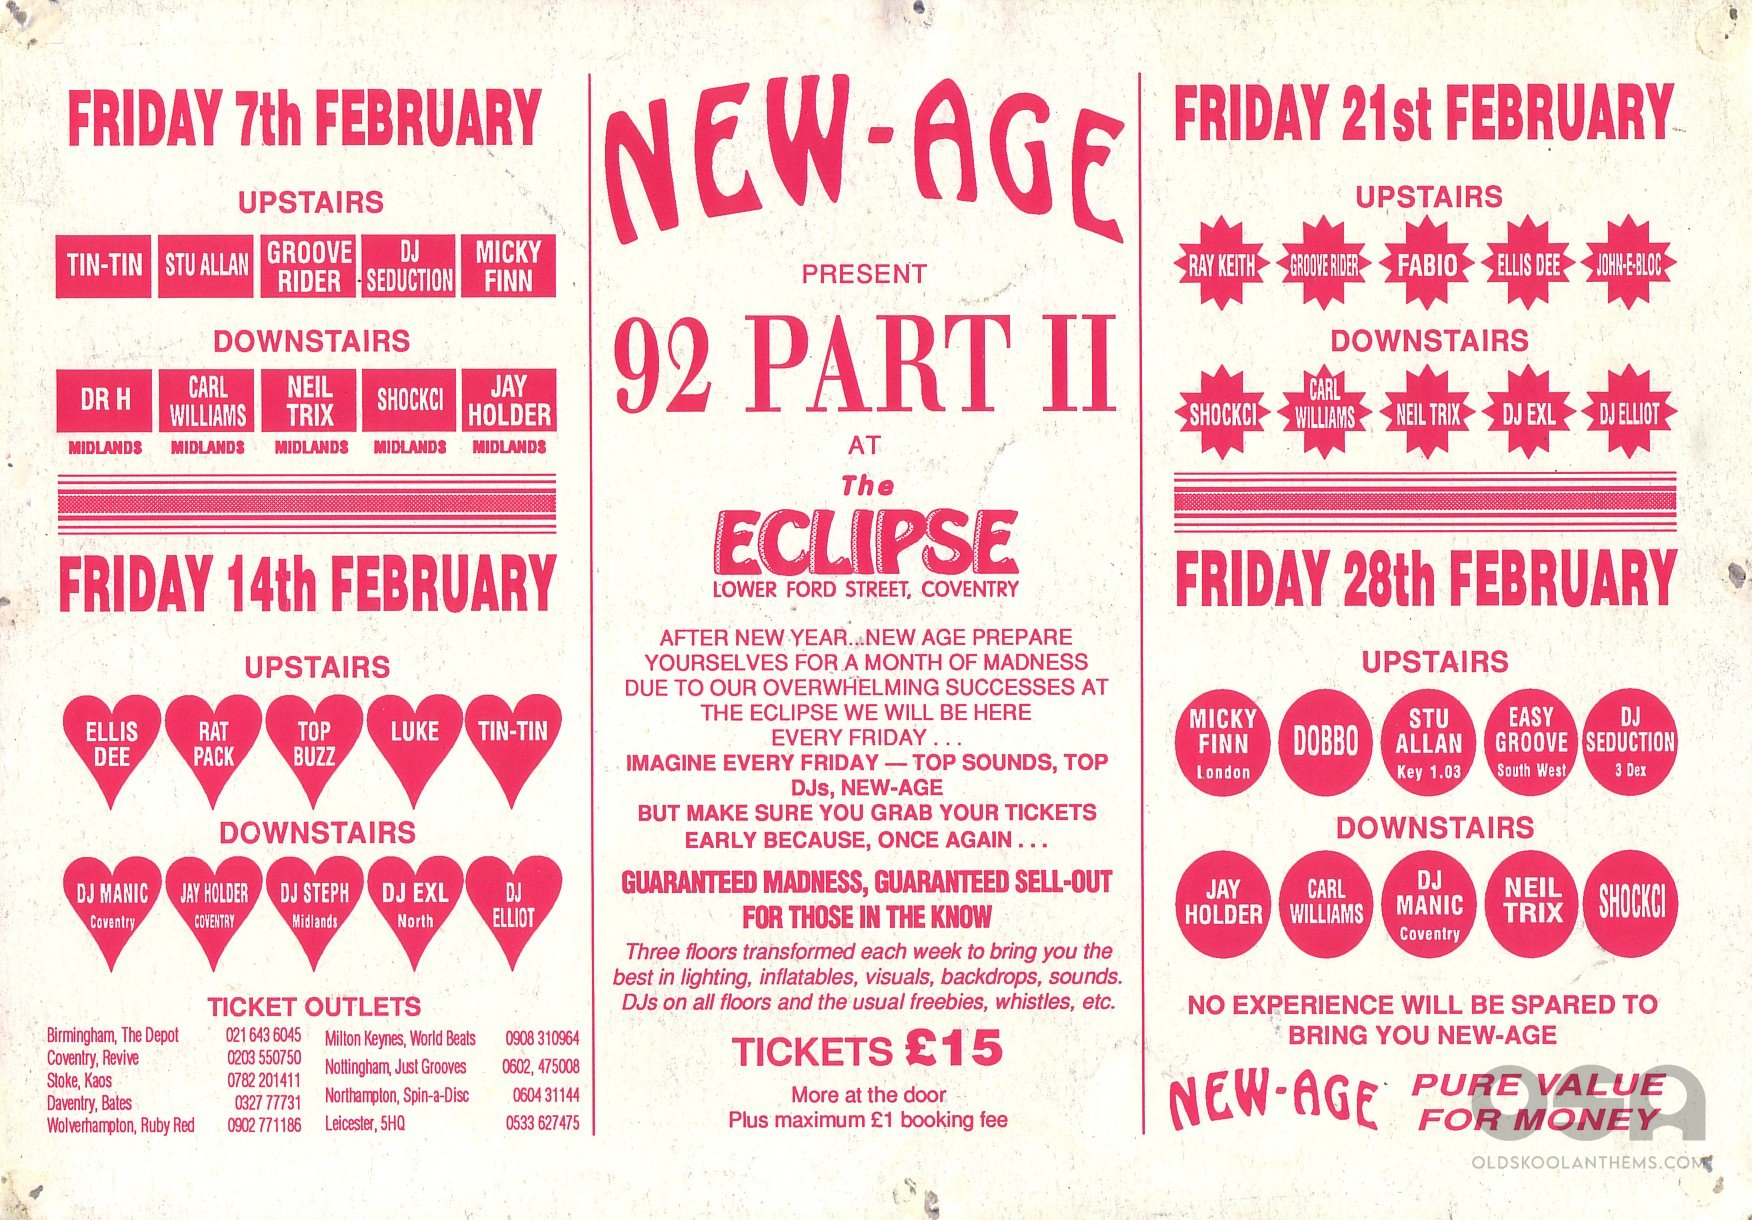 1_The_Eclipse_New_Age_Pres_92_Part_II_Feb_Dates_rear_view.jpg